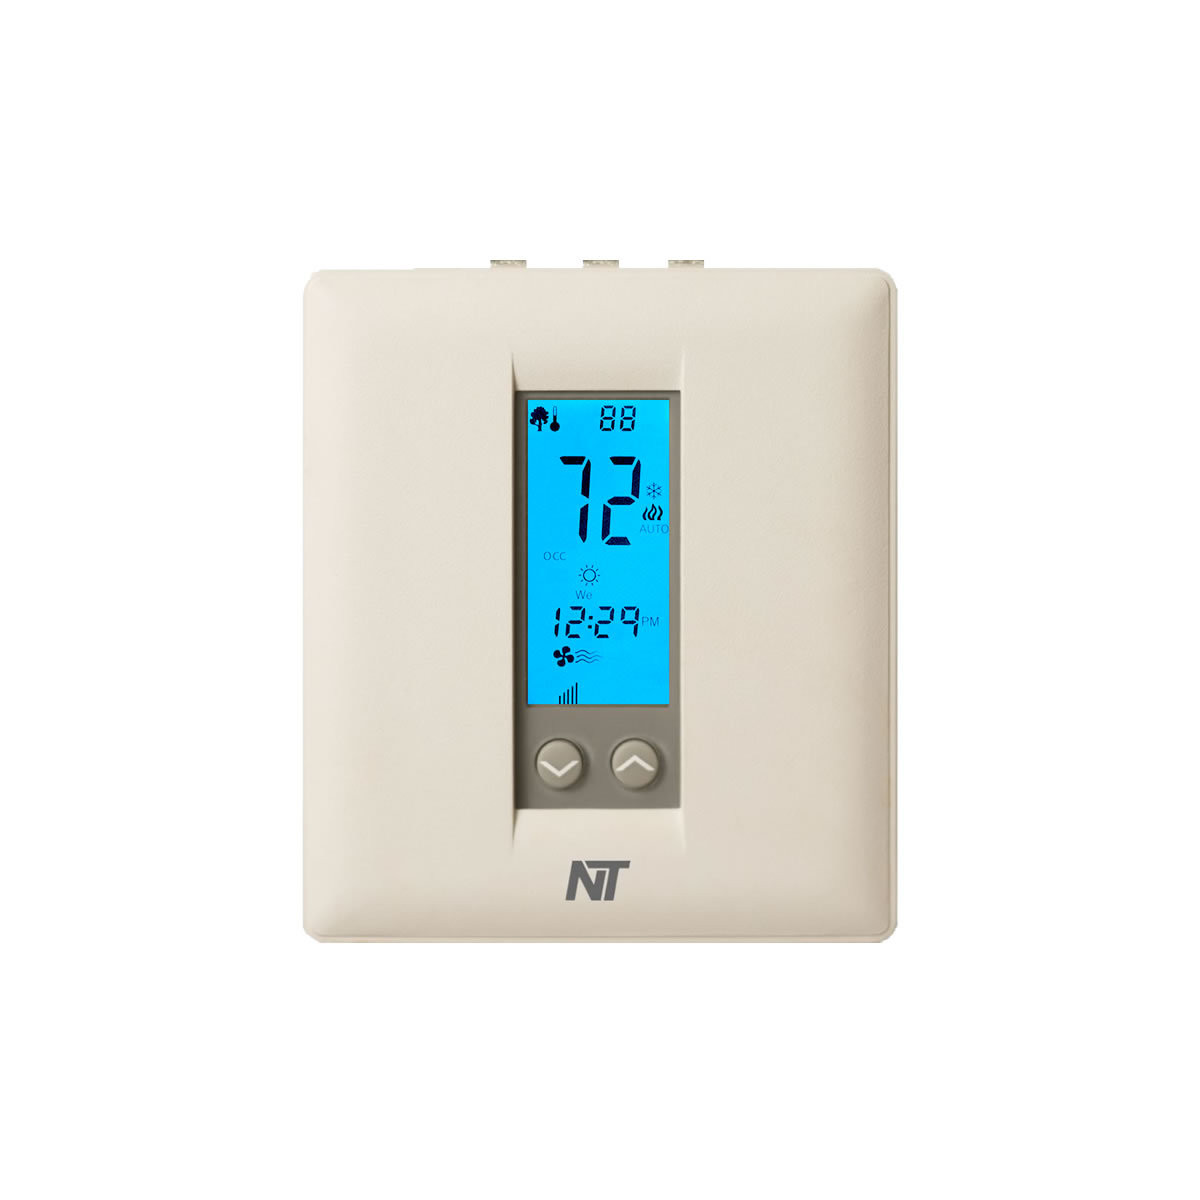 New Comfort Stat ORS-1 Outdoor Remote Sensor for CDT900 Series Thermostats 